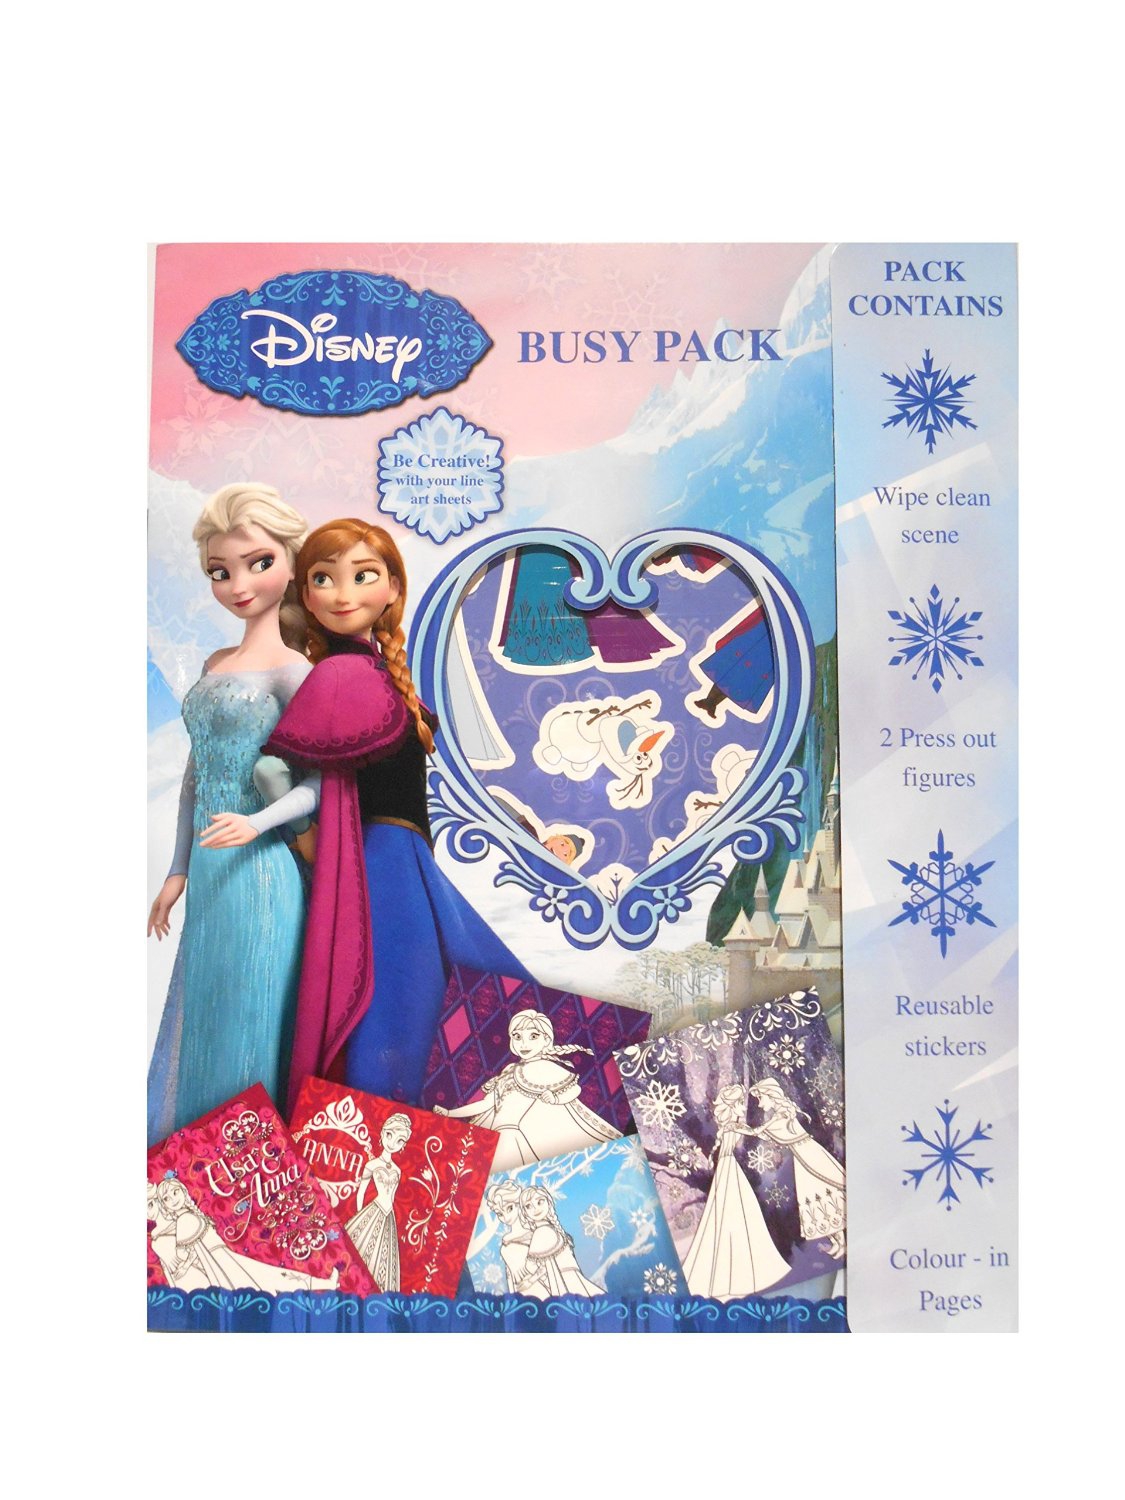 Disney Frozen 'Busy Pack' Stickers Stationery